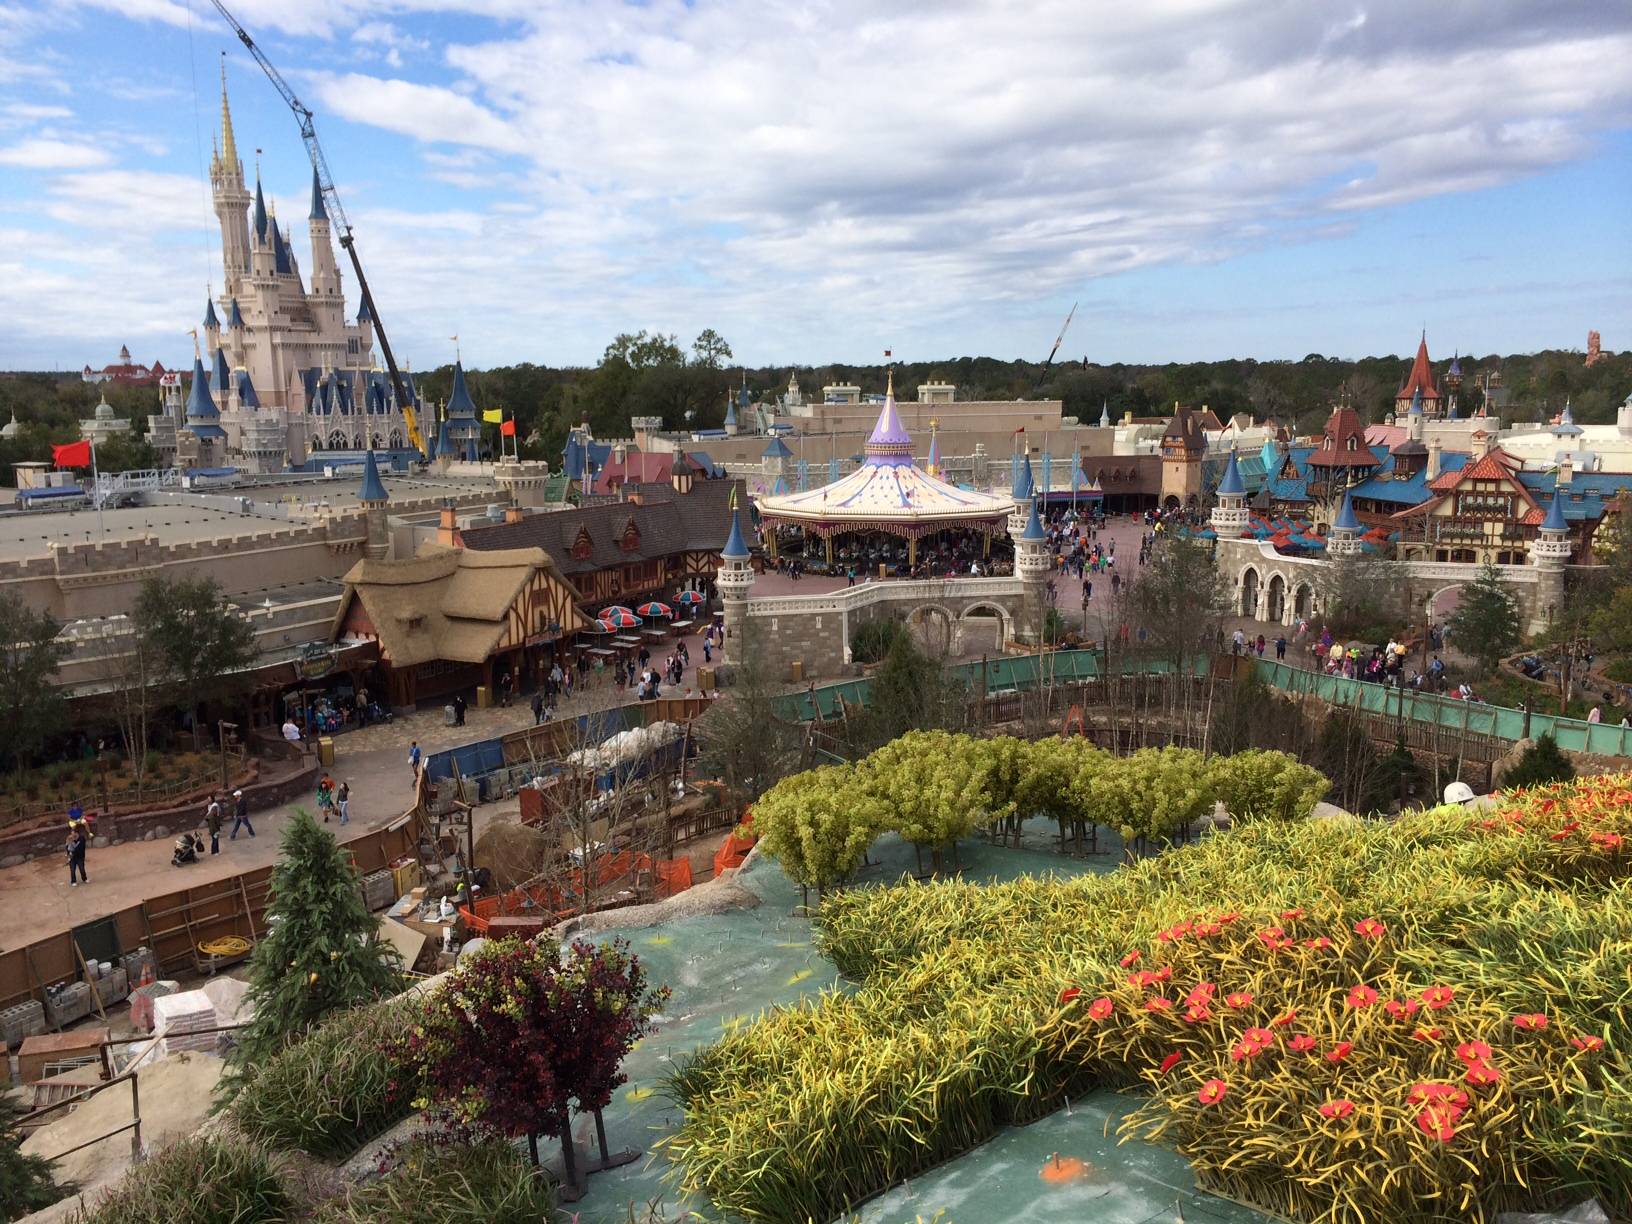 The view from the top of the Seven Dwarfs Mine Train coaster